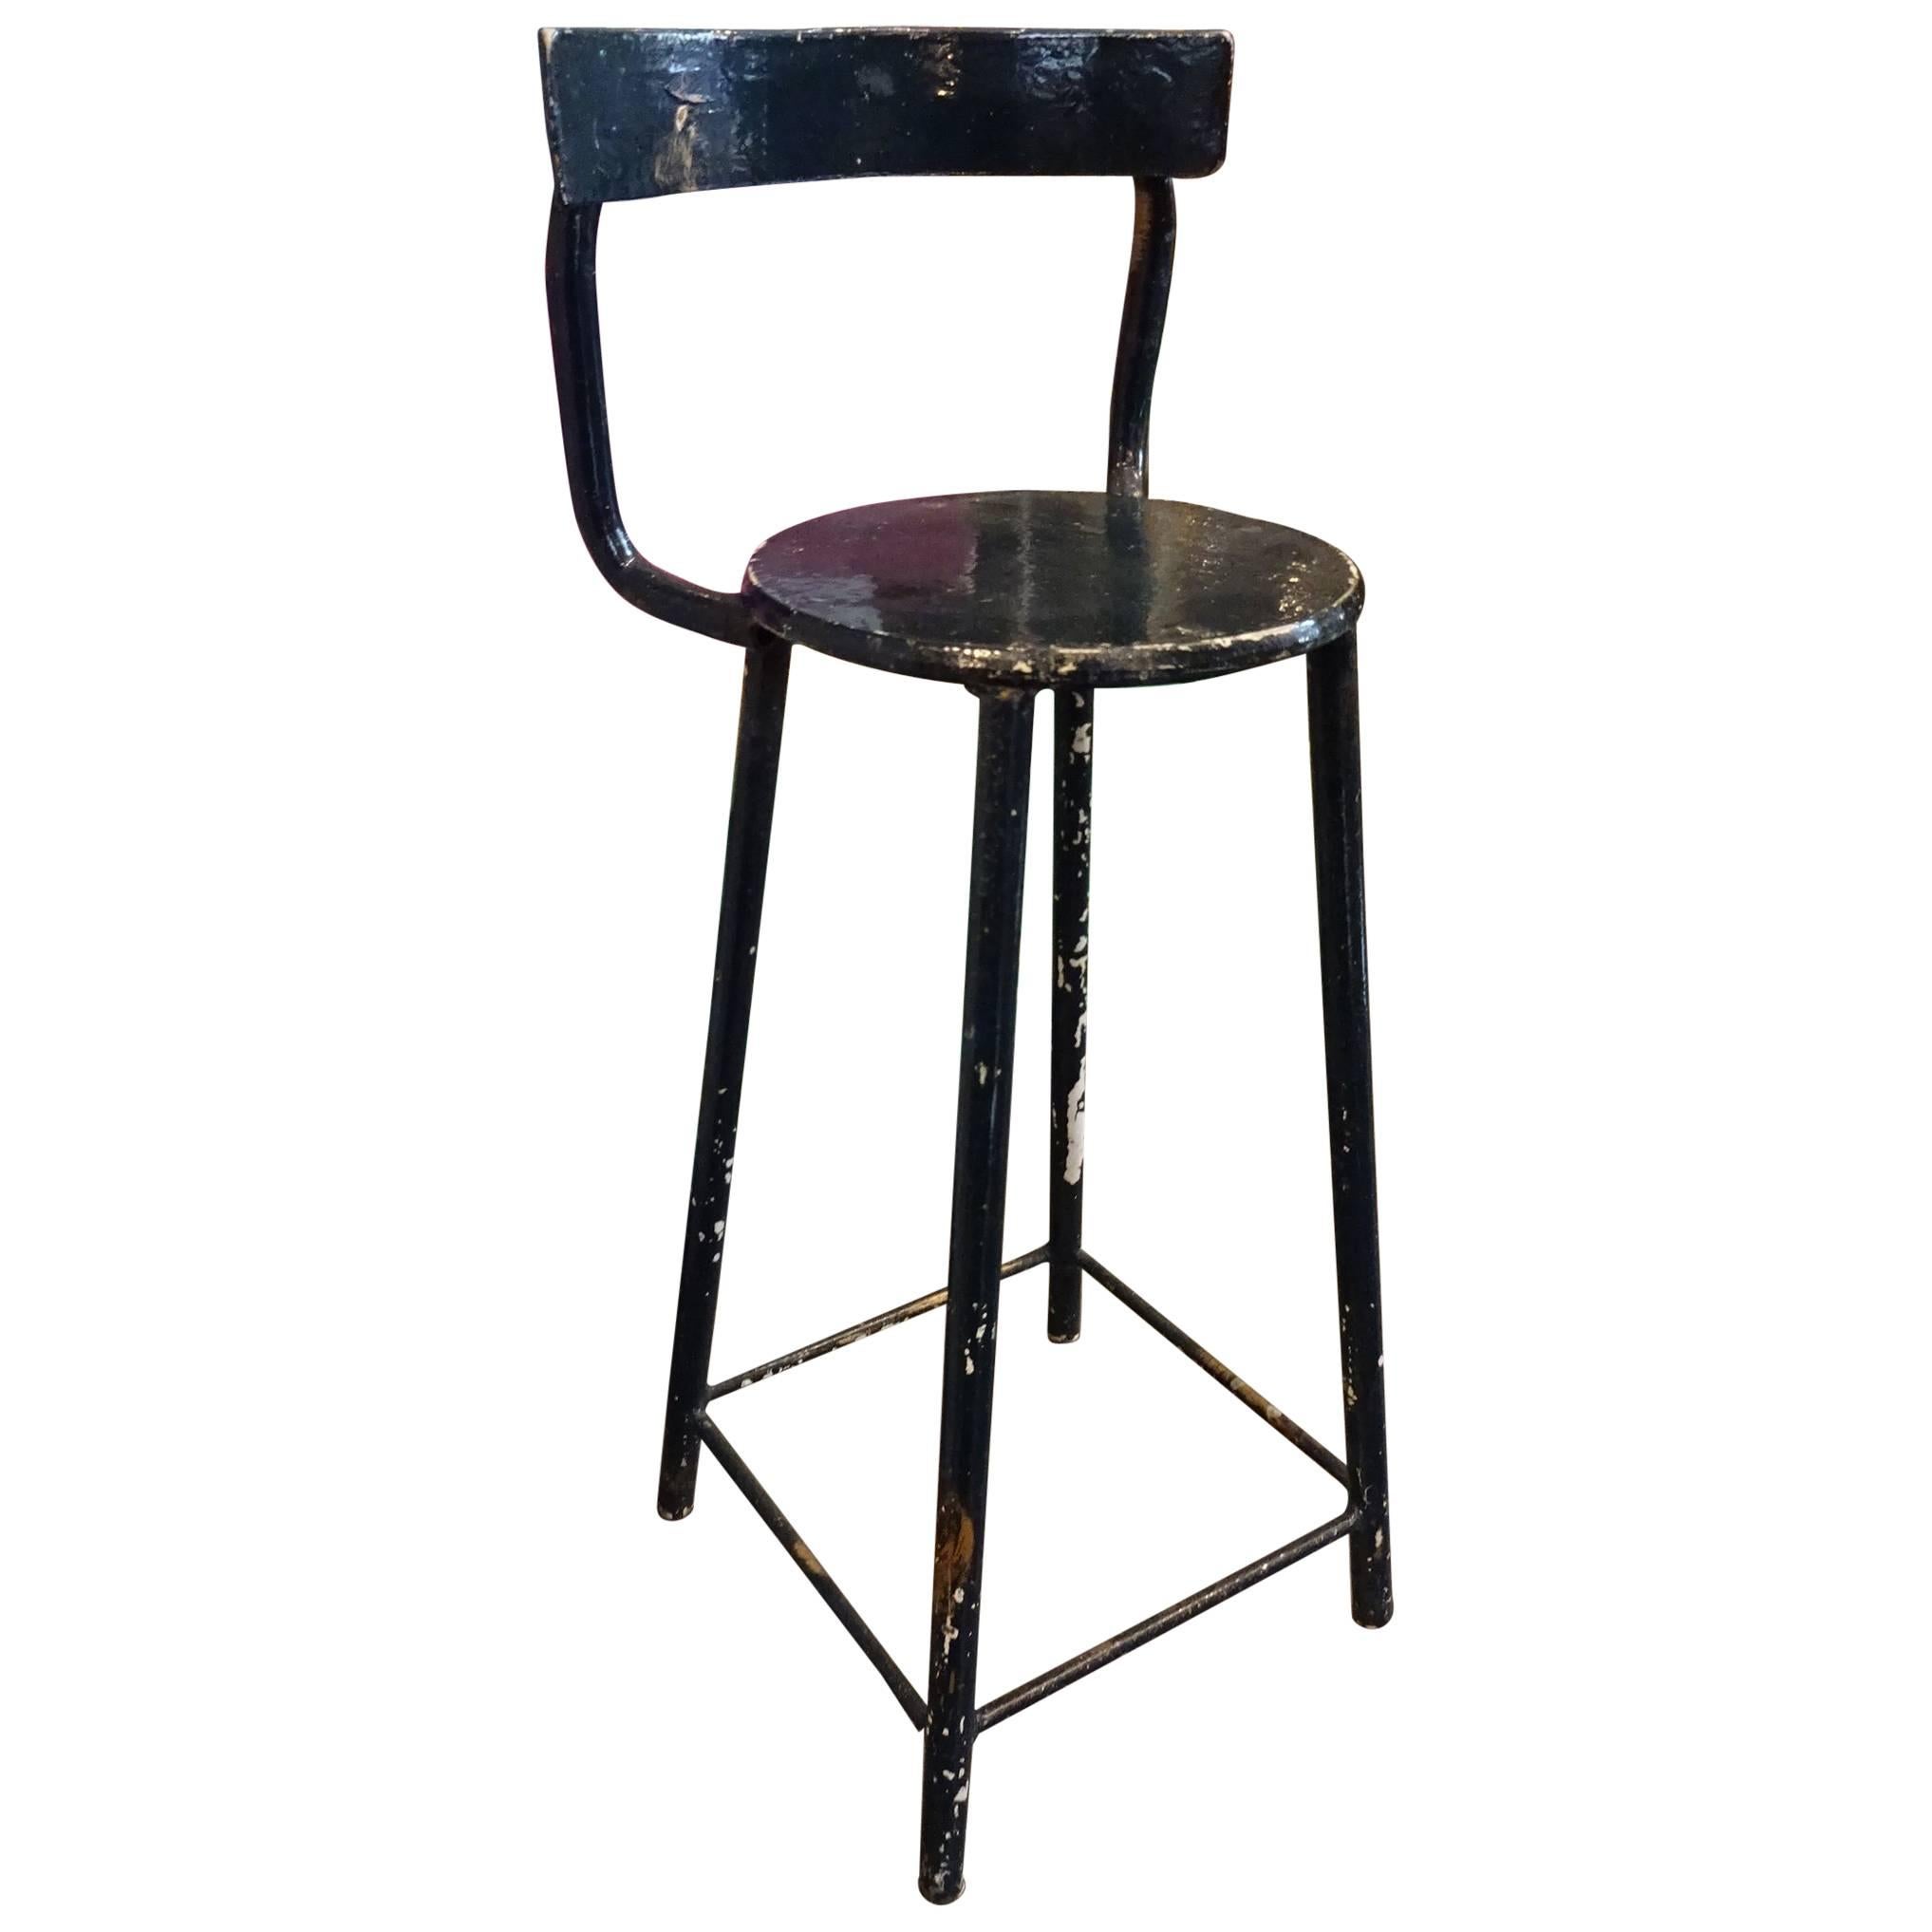 Early 20th Century French Barstool High Chair